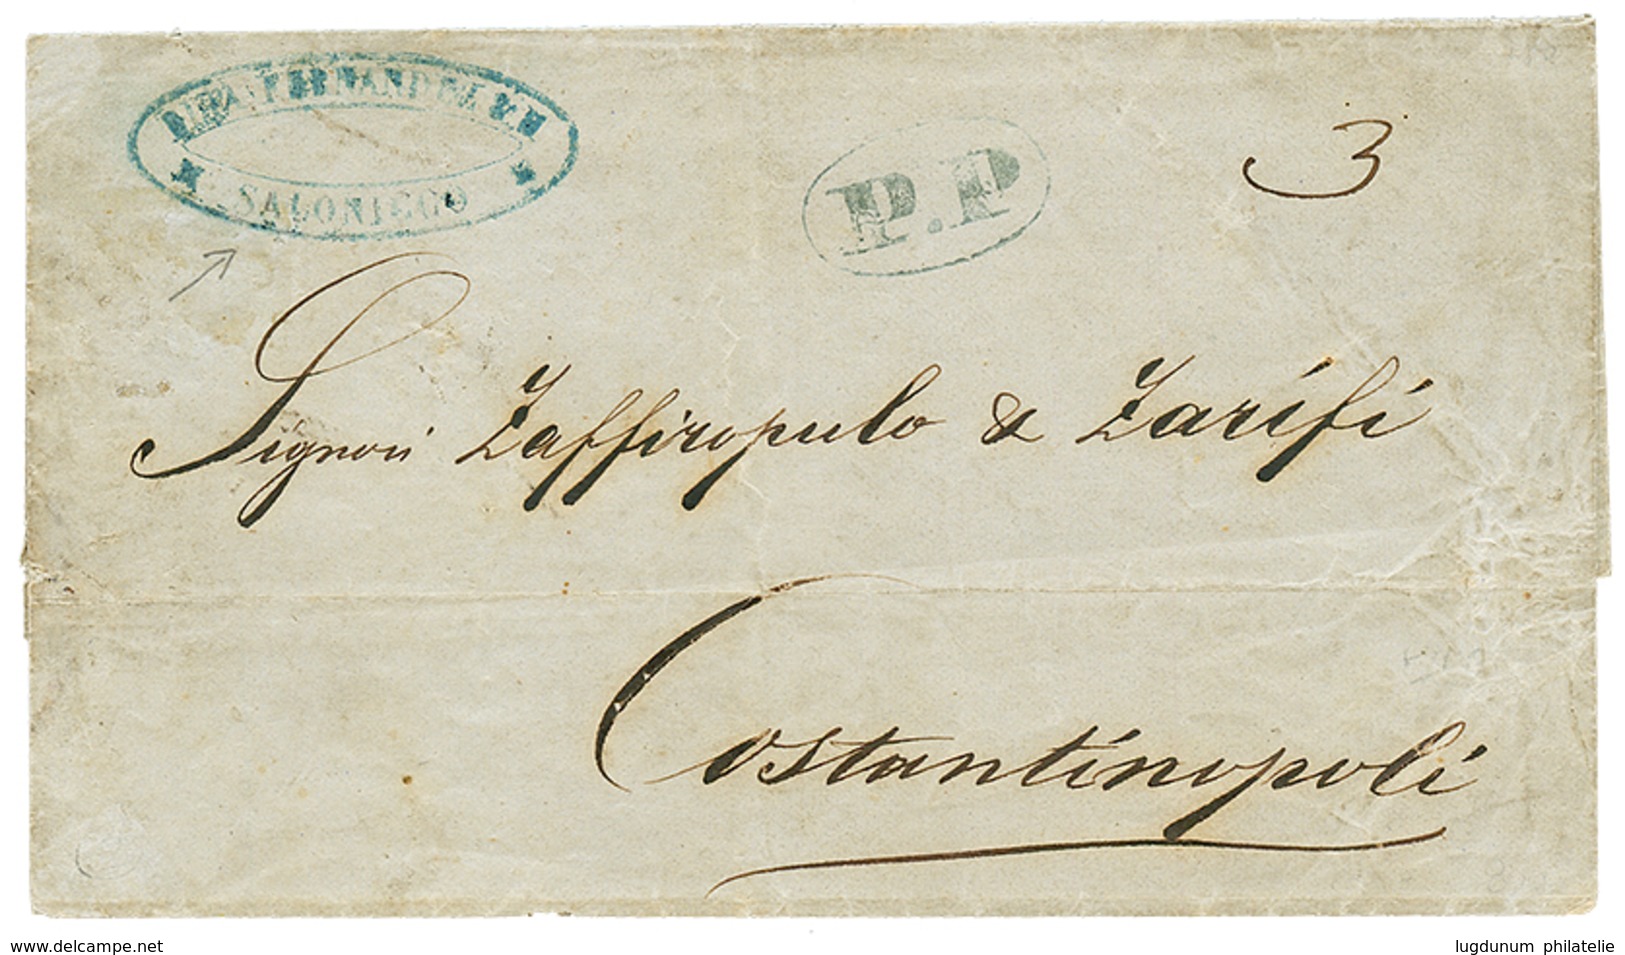 742 1852 Rare Turkish Maritime Cachet P.P + "3" Tax Marking On Cover(no Text) Datelined "SALONIQUE 8 Sept. 1852" To CONS - Eastern Austria